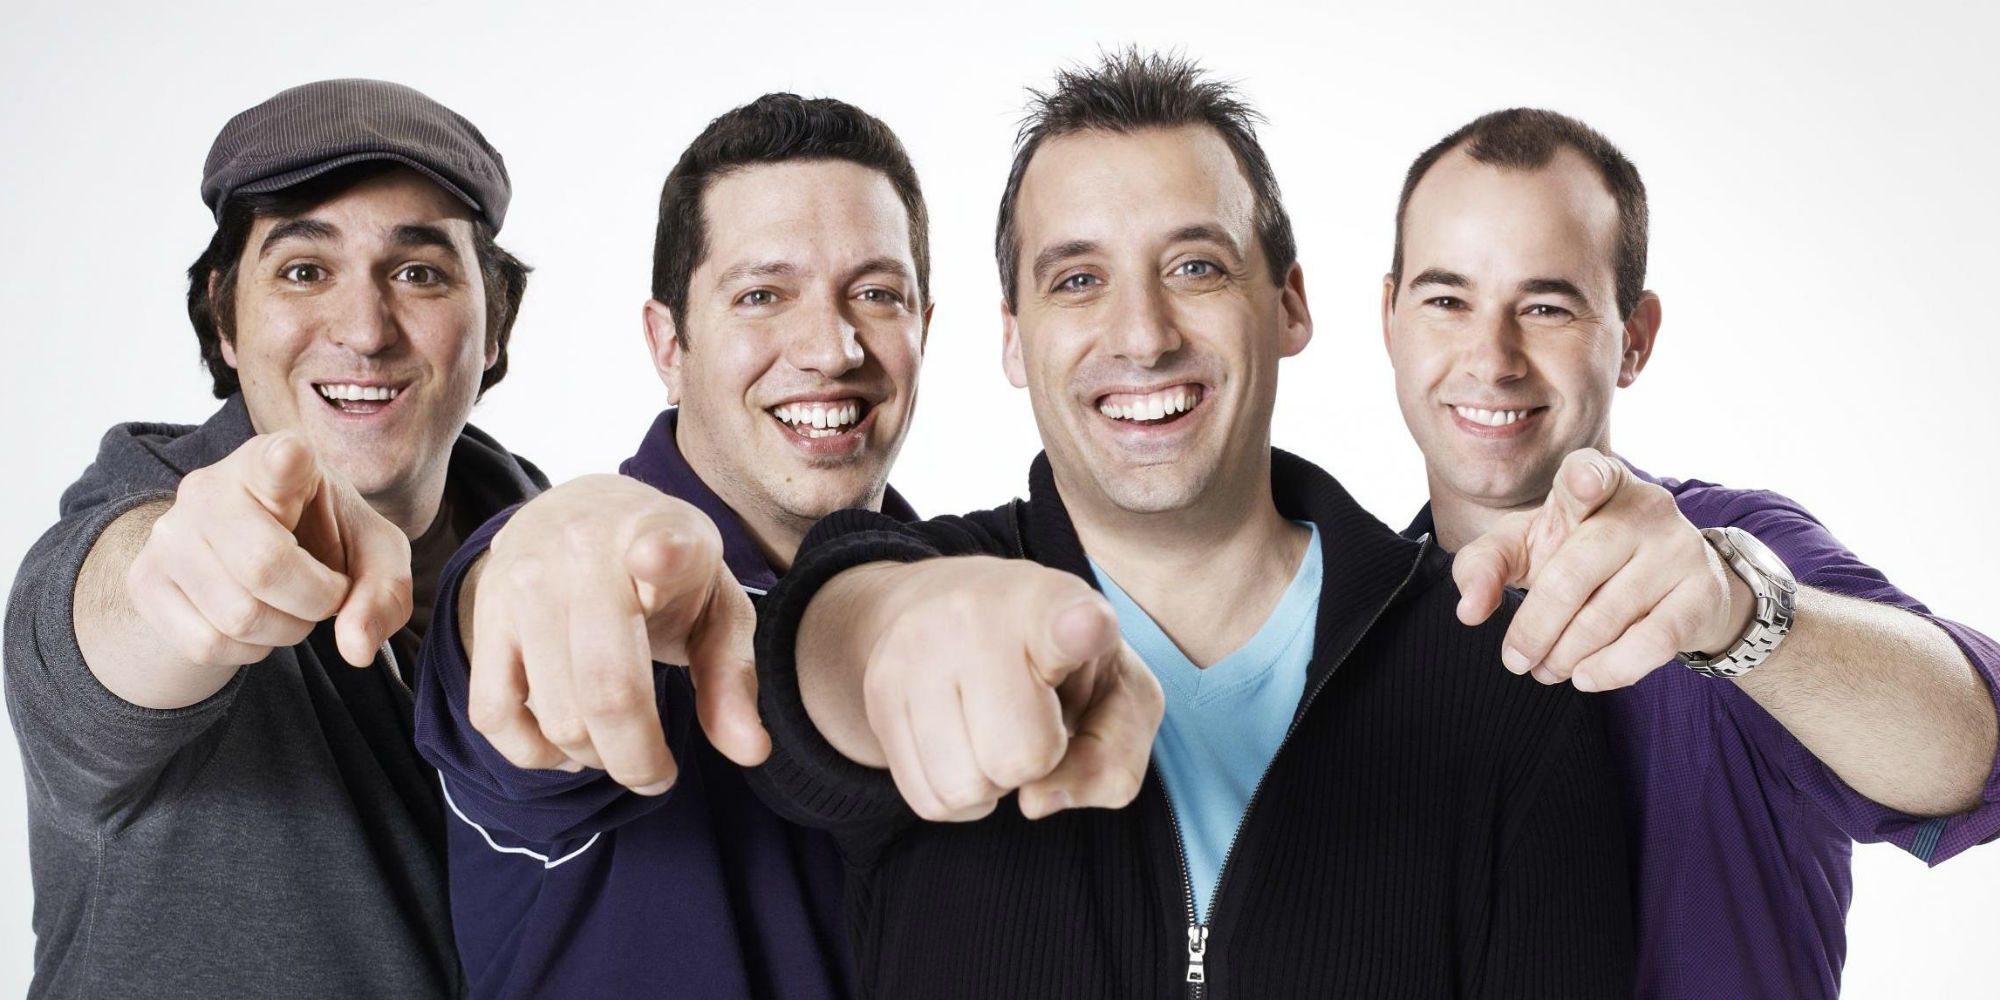 Impractical Jokers Q, Sal, Joe, and Murr all pointing